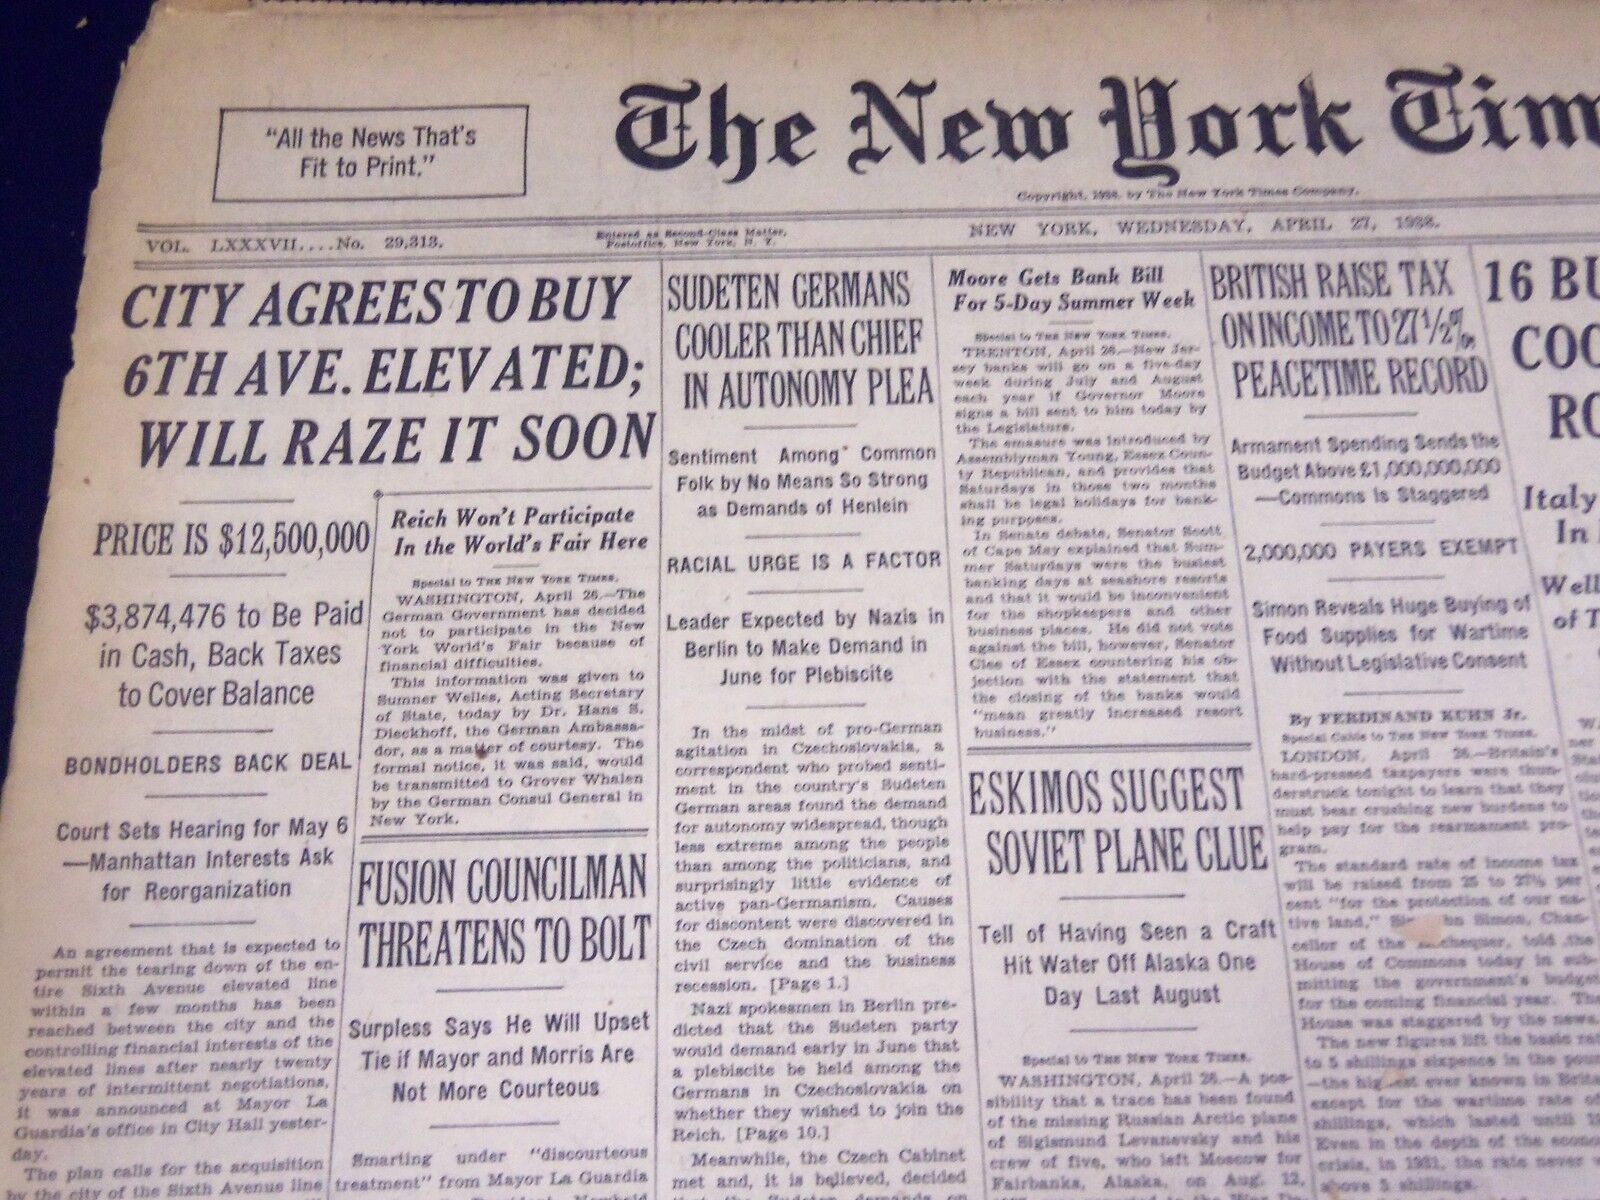 1938 APRIL 27 NEW YORK TIMES - CITY AGREES TO BUY 6TH AVE ELEVATED - NT 694